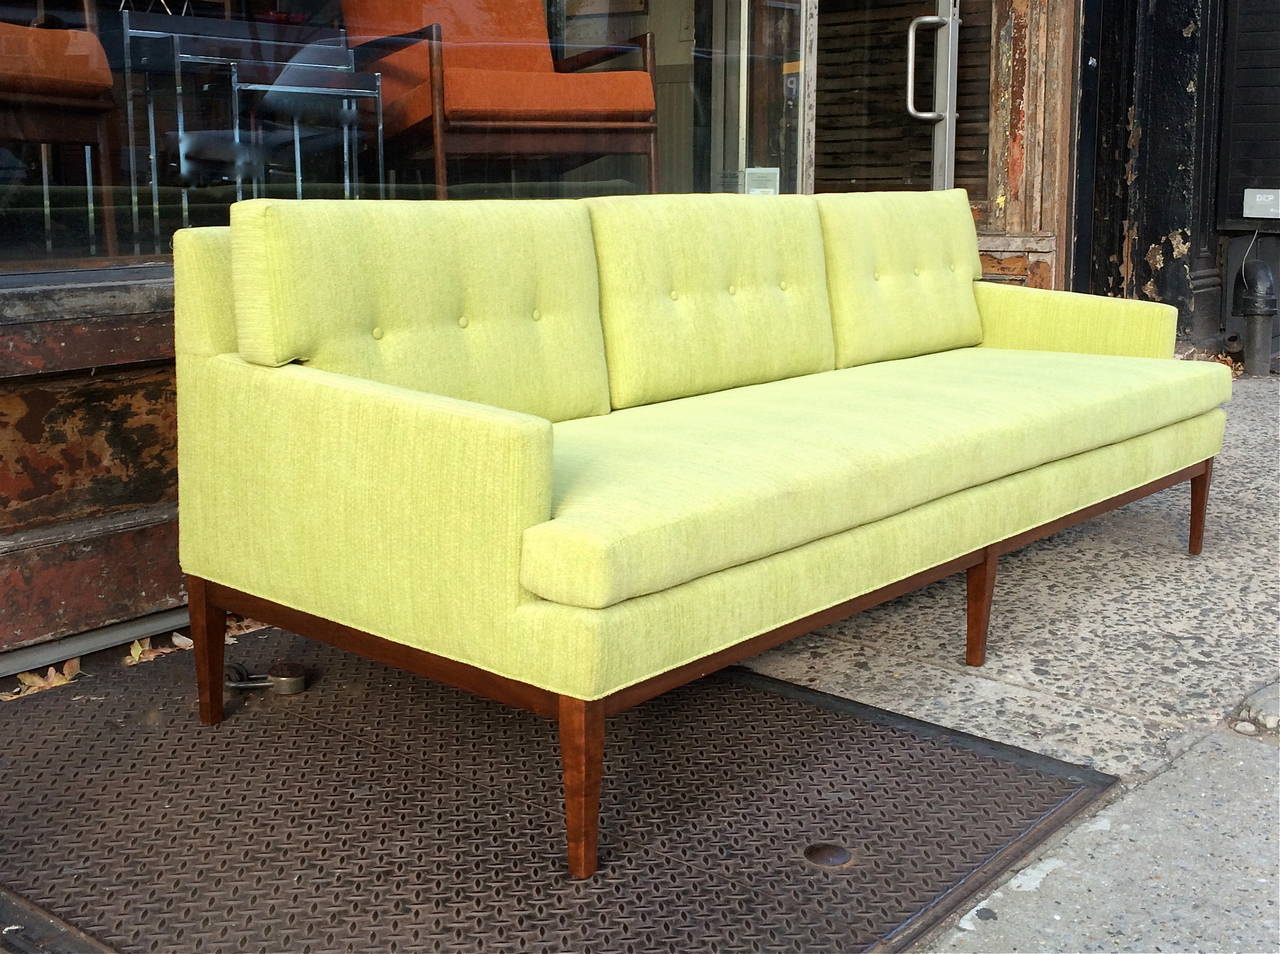 Vintage, 1960s, Mid-Century Modern sofa by Paul McCobb for Directional is fully restored with walnut frame and reupholstered in a plush chenille chartreuse upholstery.